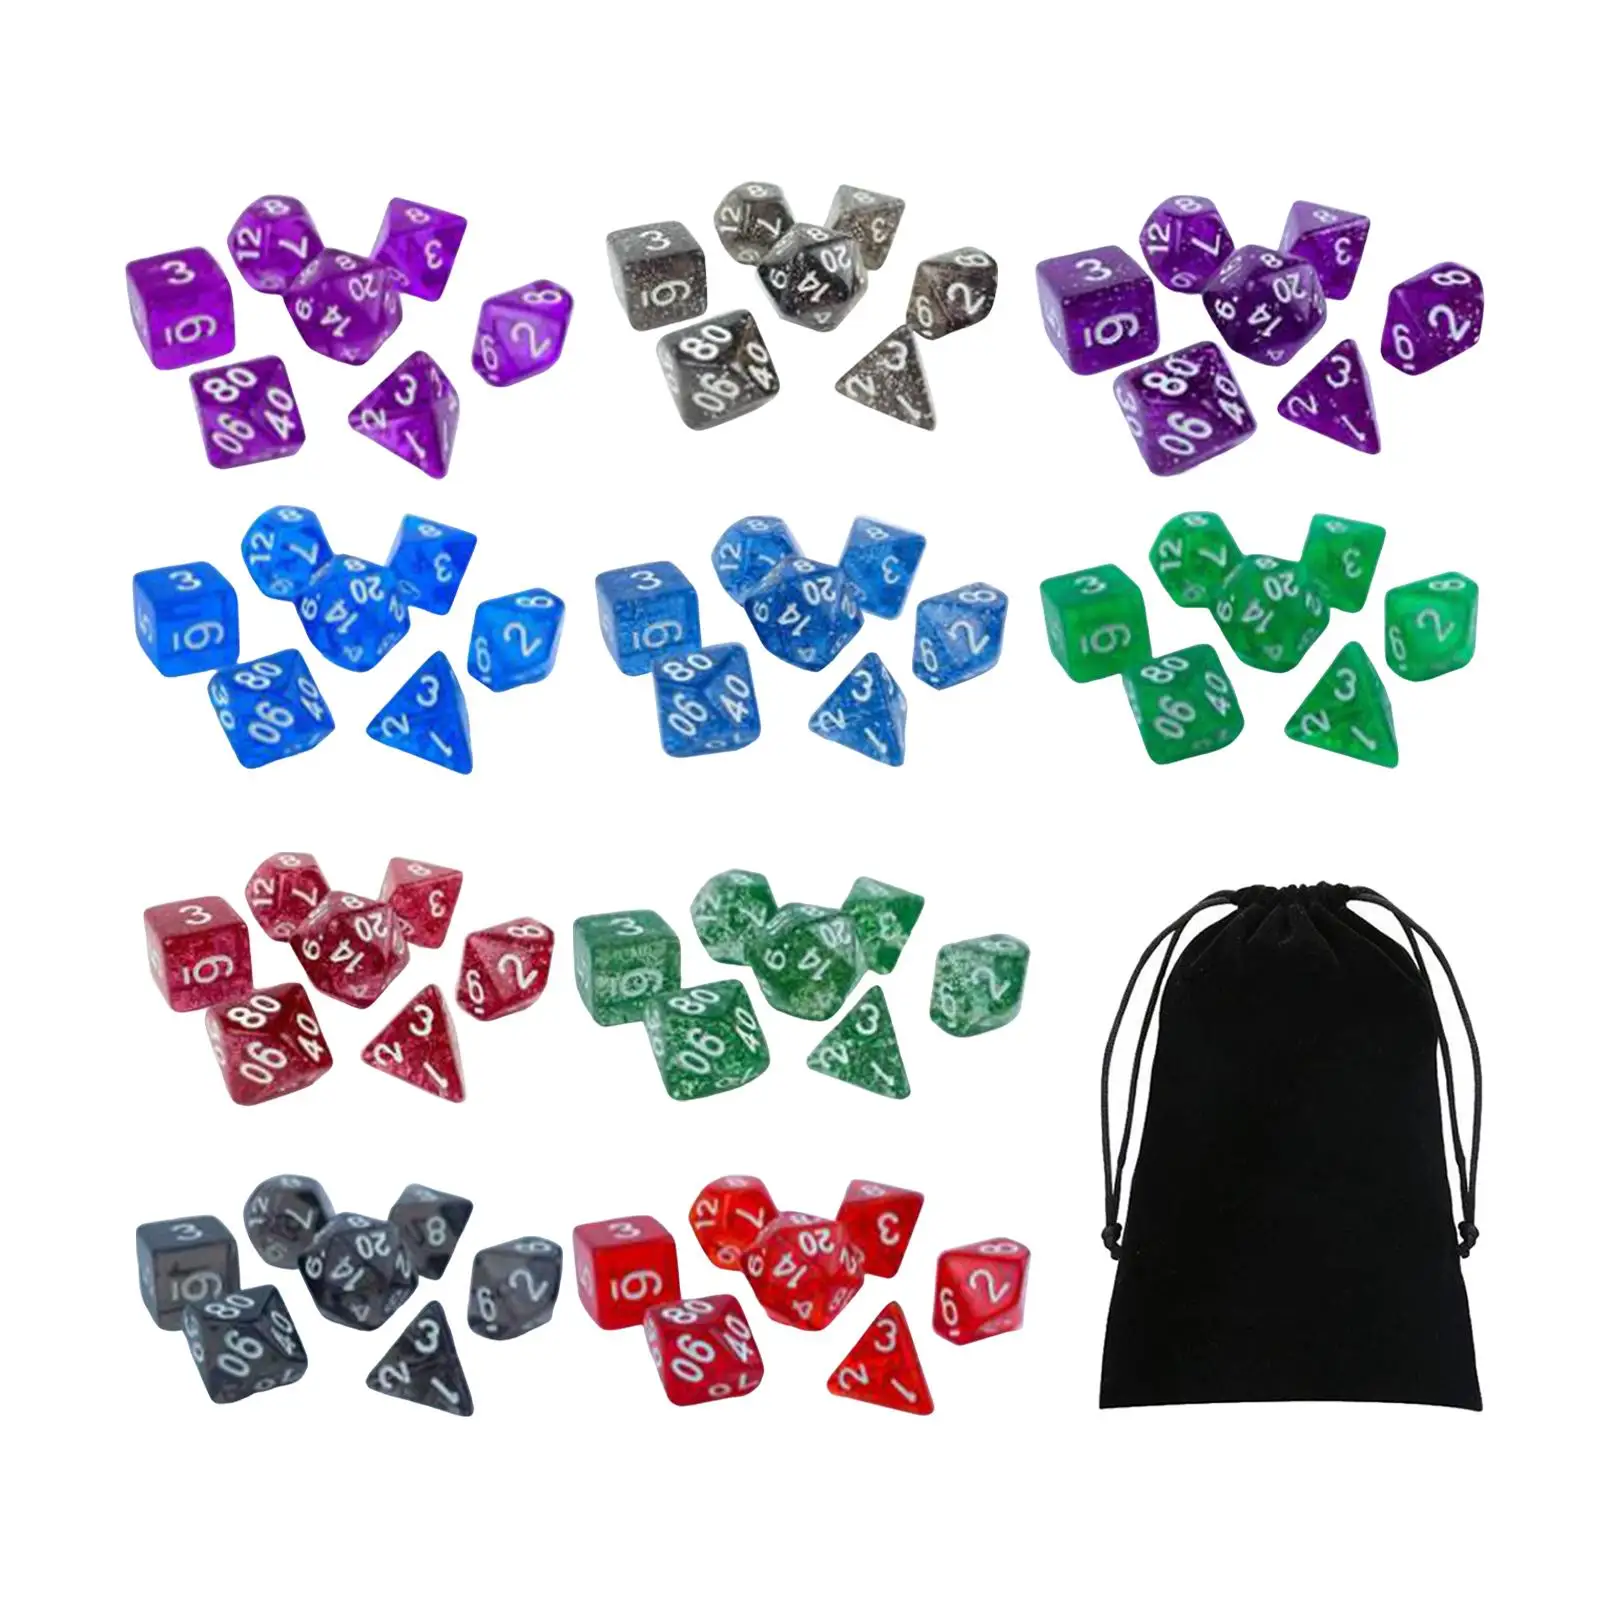 70 Pieces Acrylic Polyhedral Dice Set Toys, Board Game Props